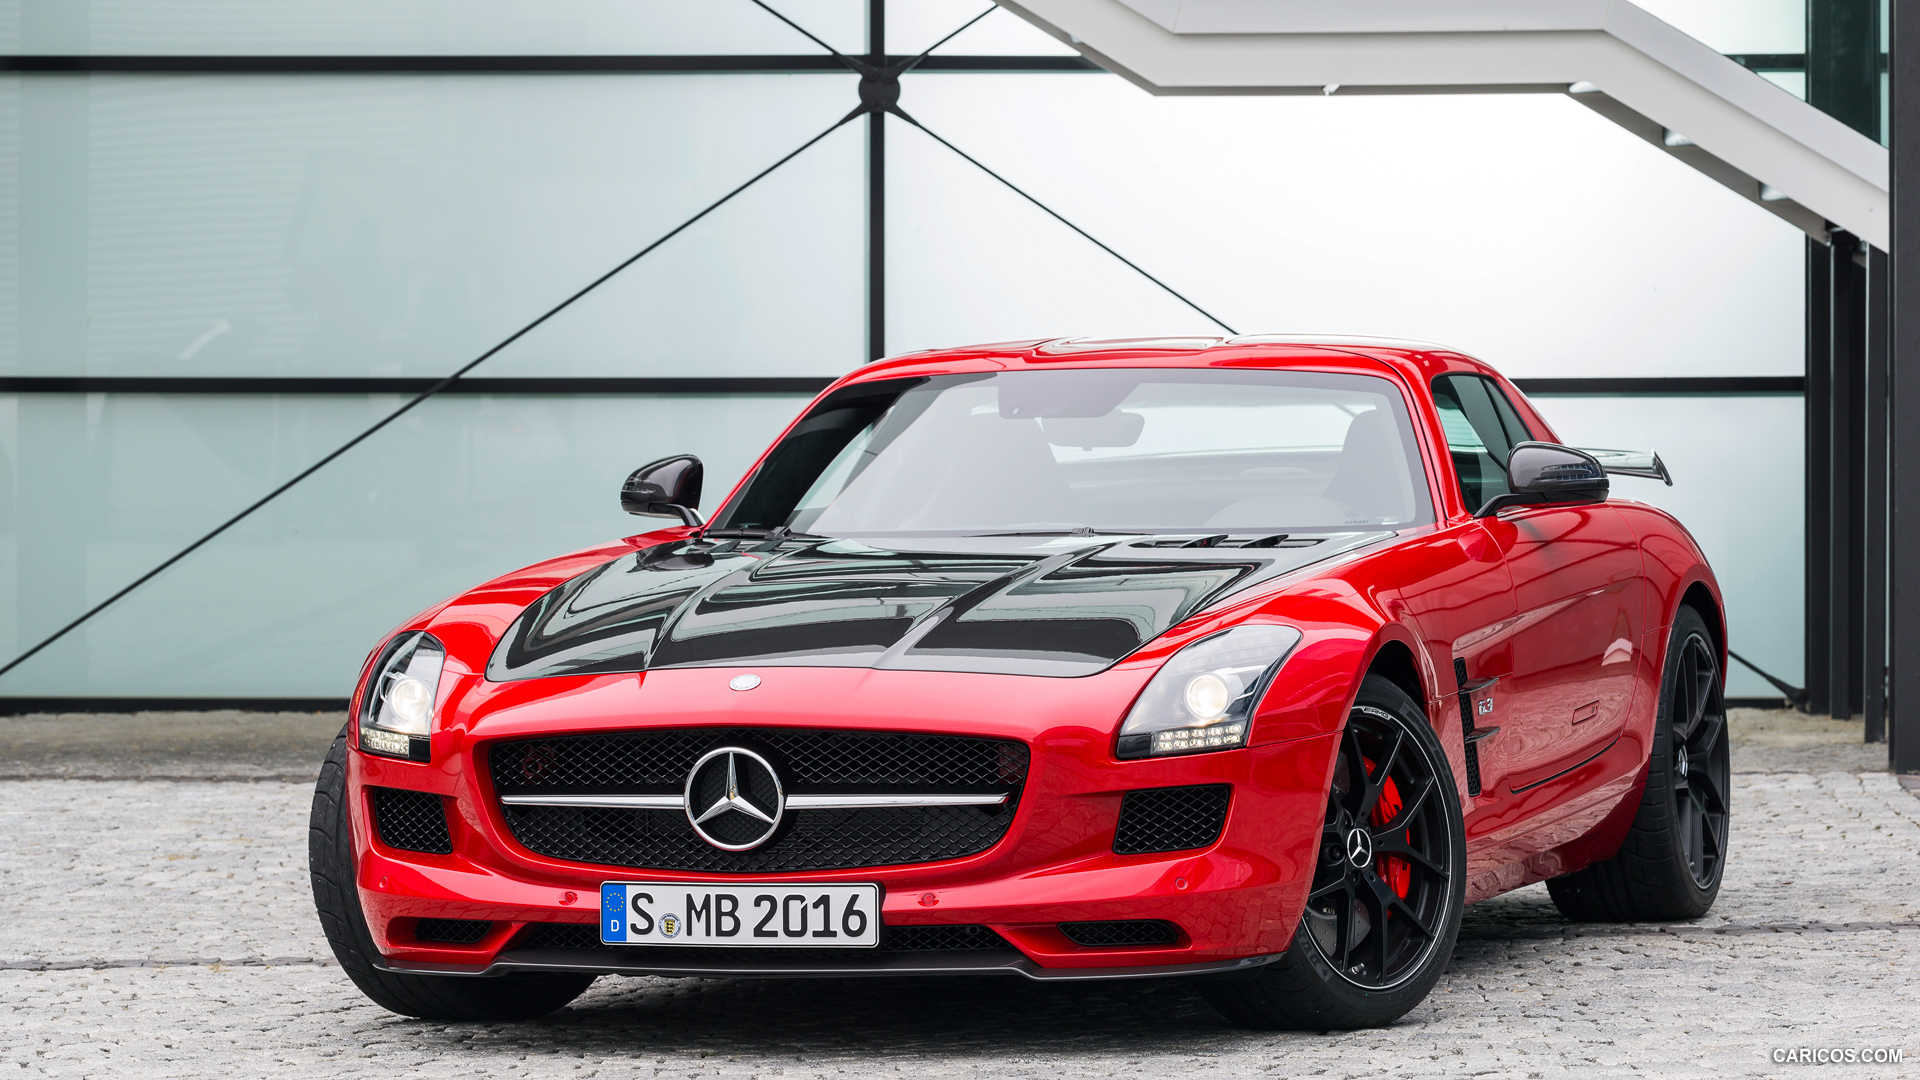  2015 Mercedes-Benz SLS AMG GT Coupe Final Edition - Front, #10 of 41